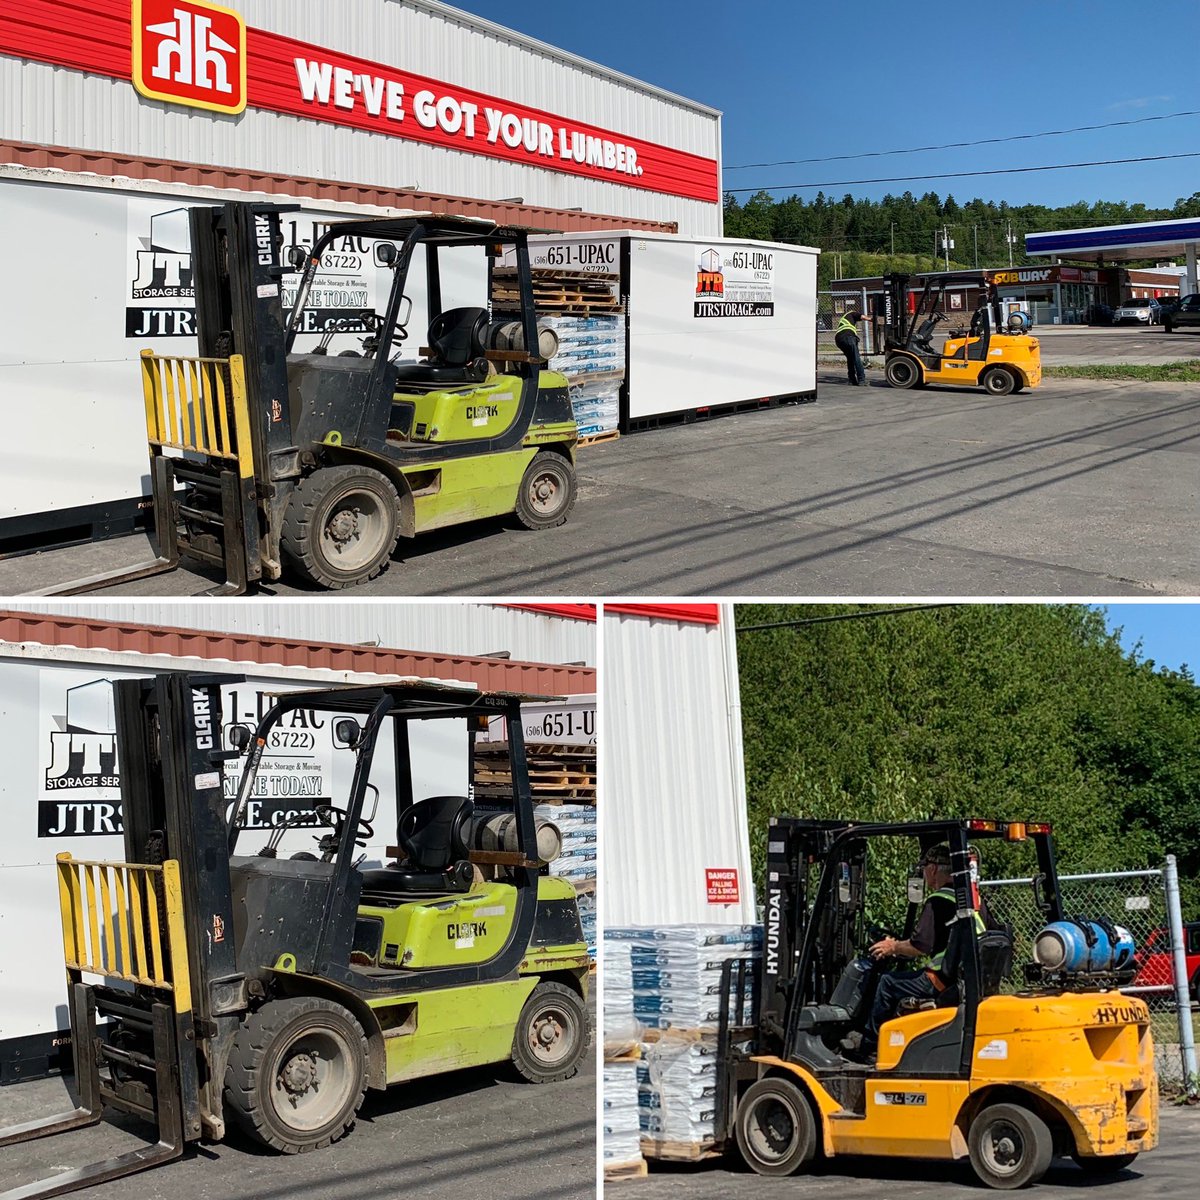 A few Lift Trucks out front working hard at our friends at @GrandBayHH in Grand Bay-Westfield NB. 

#homehardware #haltonlifttruck #forkliftsales #forkliftservice #forkliftrental #forkliftparts #grandbaywestfield